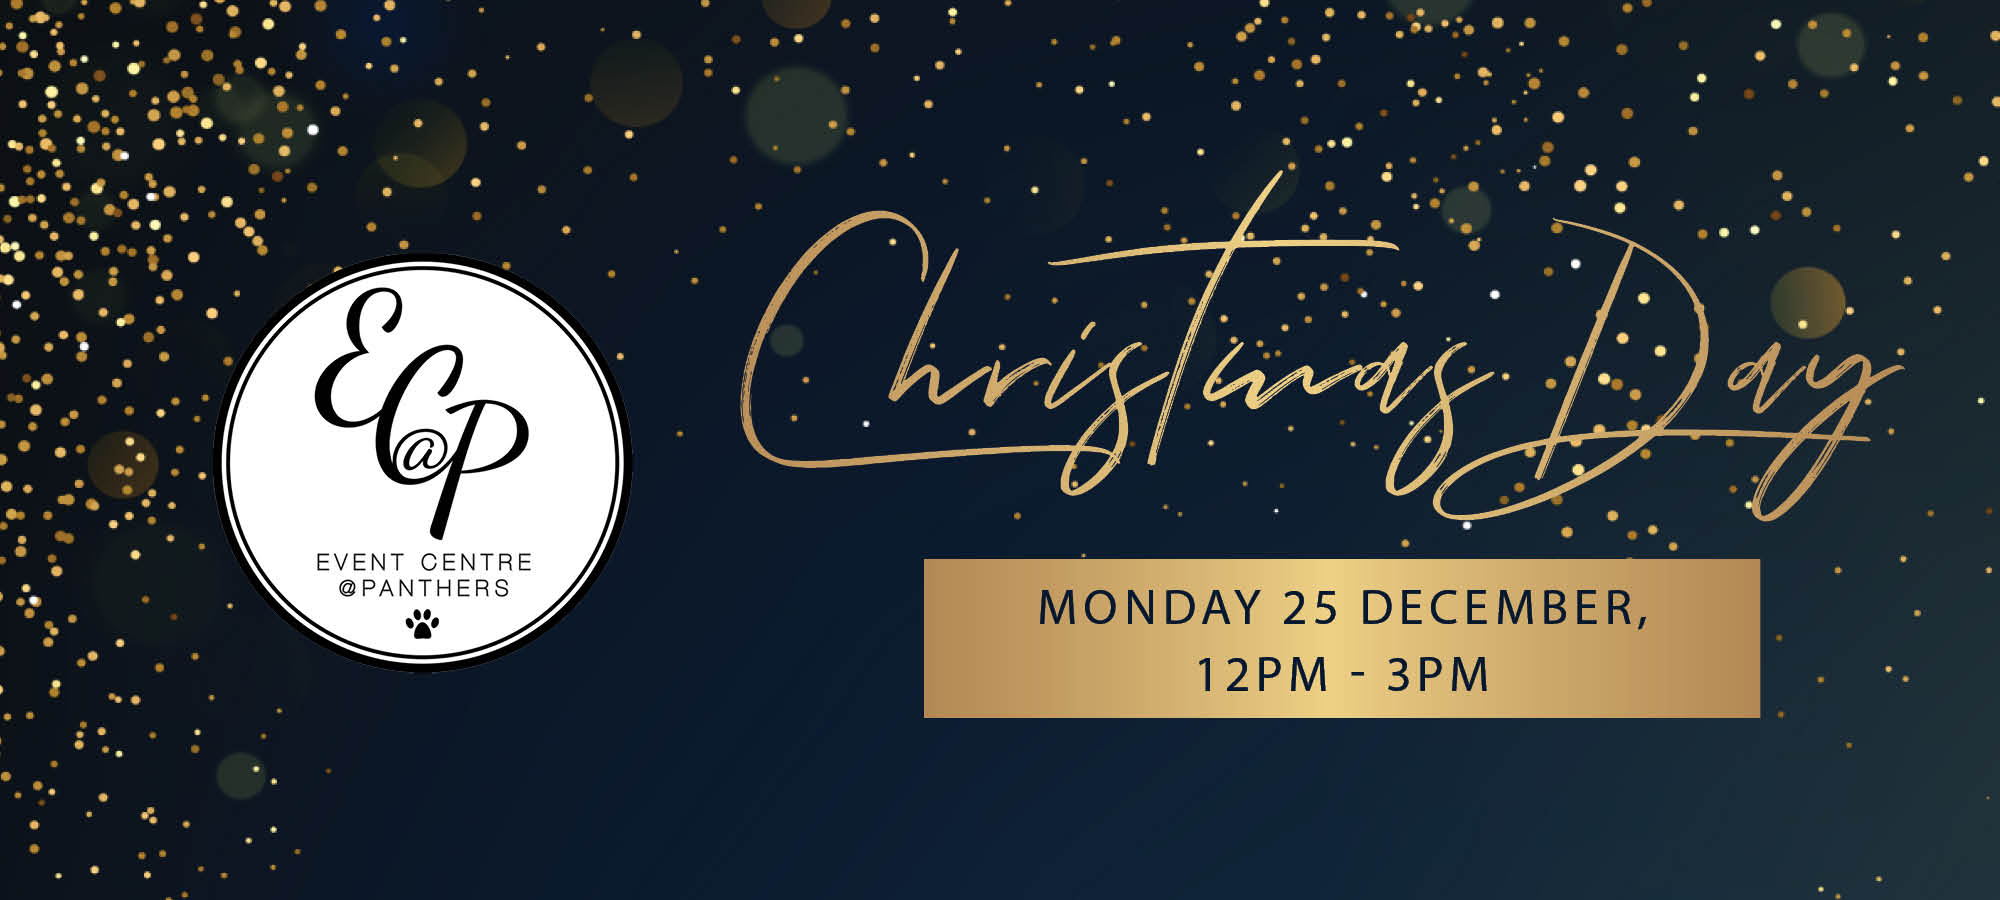 Christmas Day Lunch with the Event Centre at Panthers